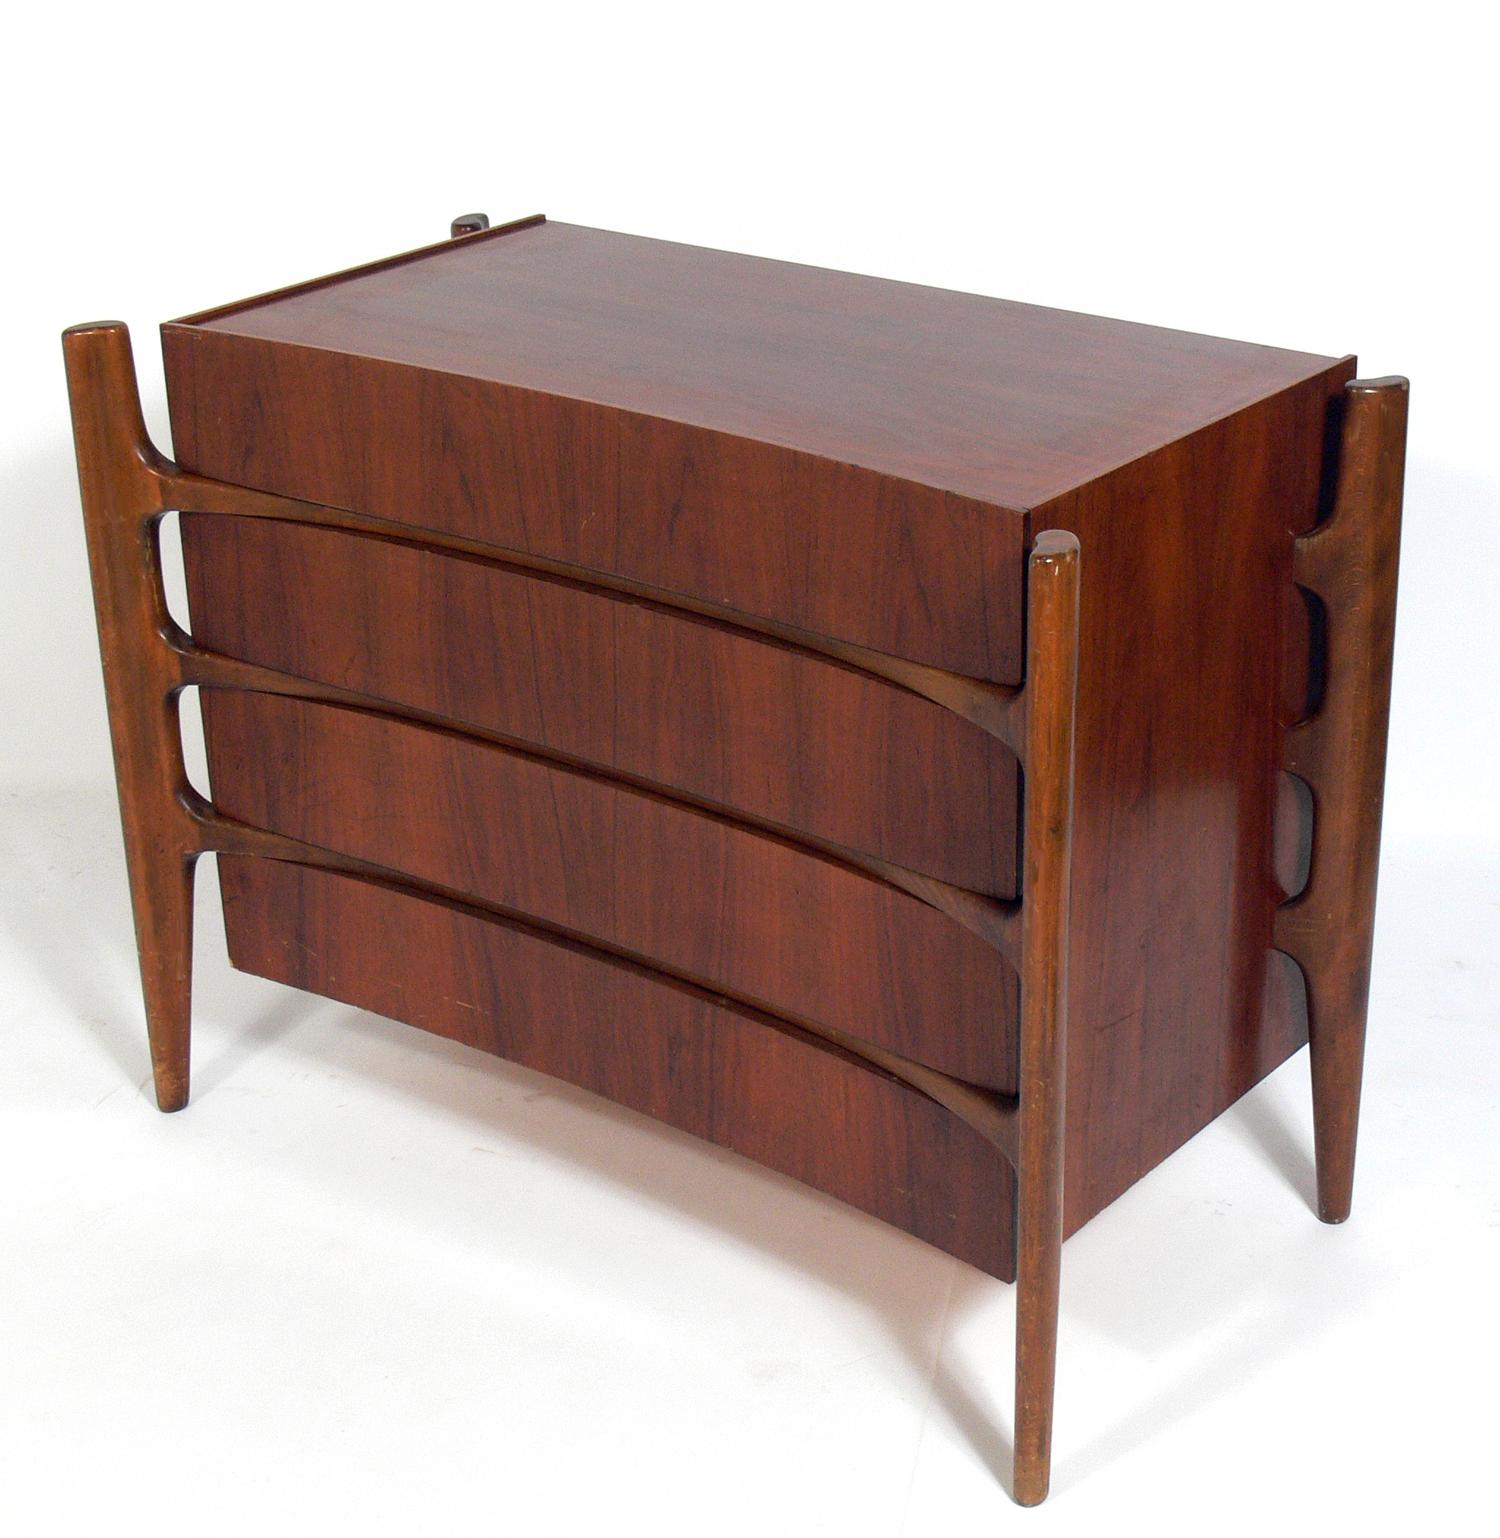 Sculptural Danish modern style chest, designed by William Hinn for Urban Furniture, Sweden, circa 1950s. It is currently being refinished and will look incredible when completed. The price noted includes refinishing. It is a versatile size and can